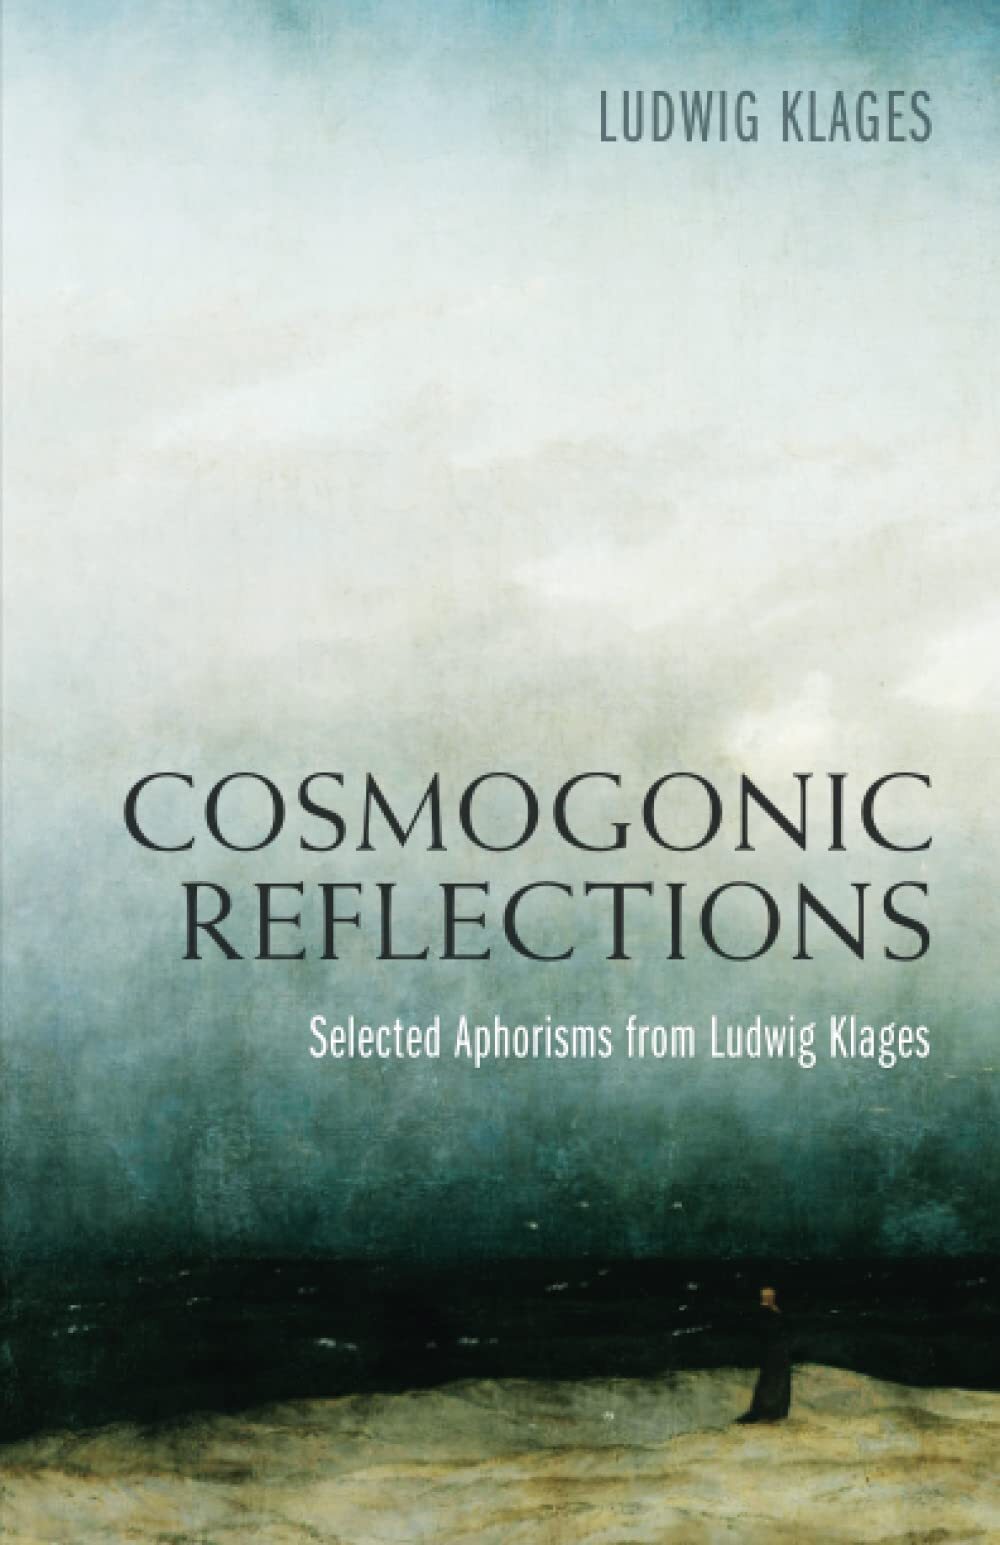 Cosmogonic Reflections: Selected Aphorisms from Ludwig Klages